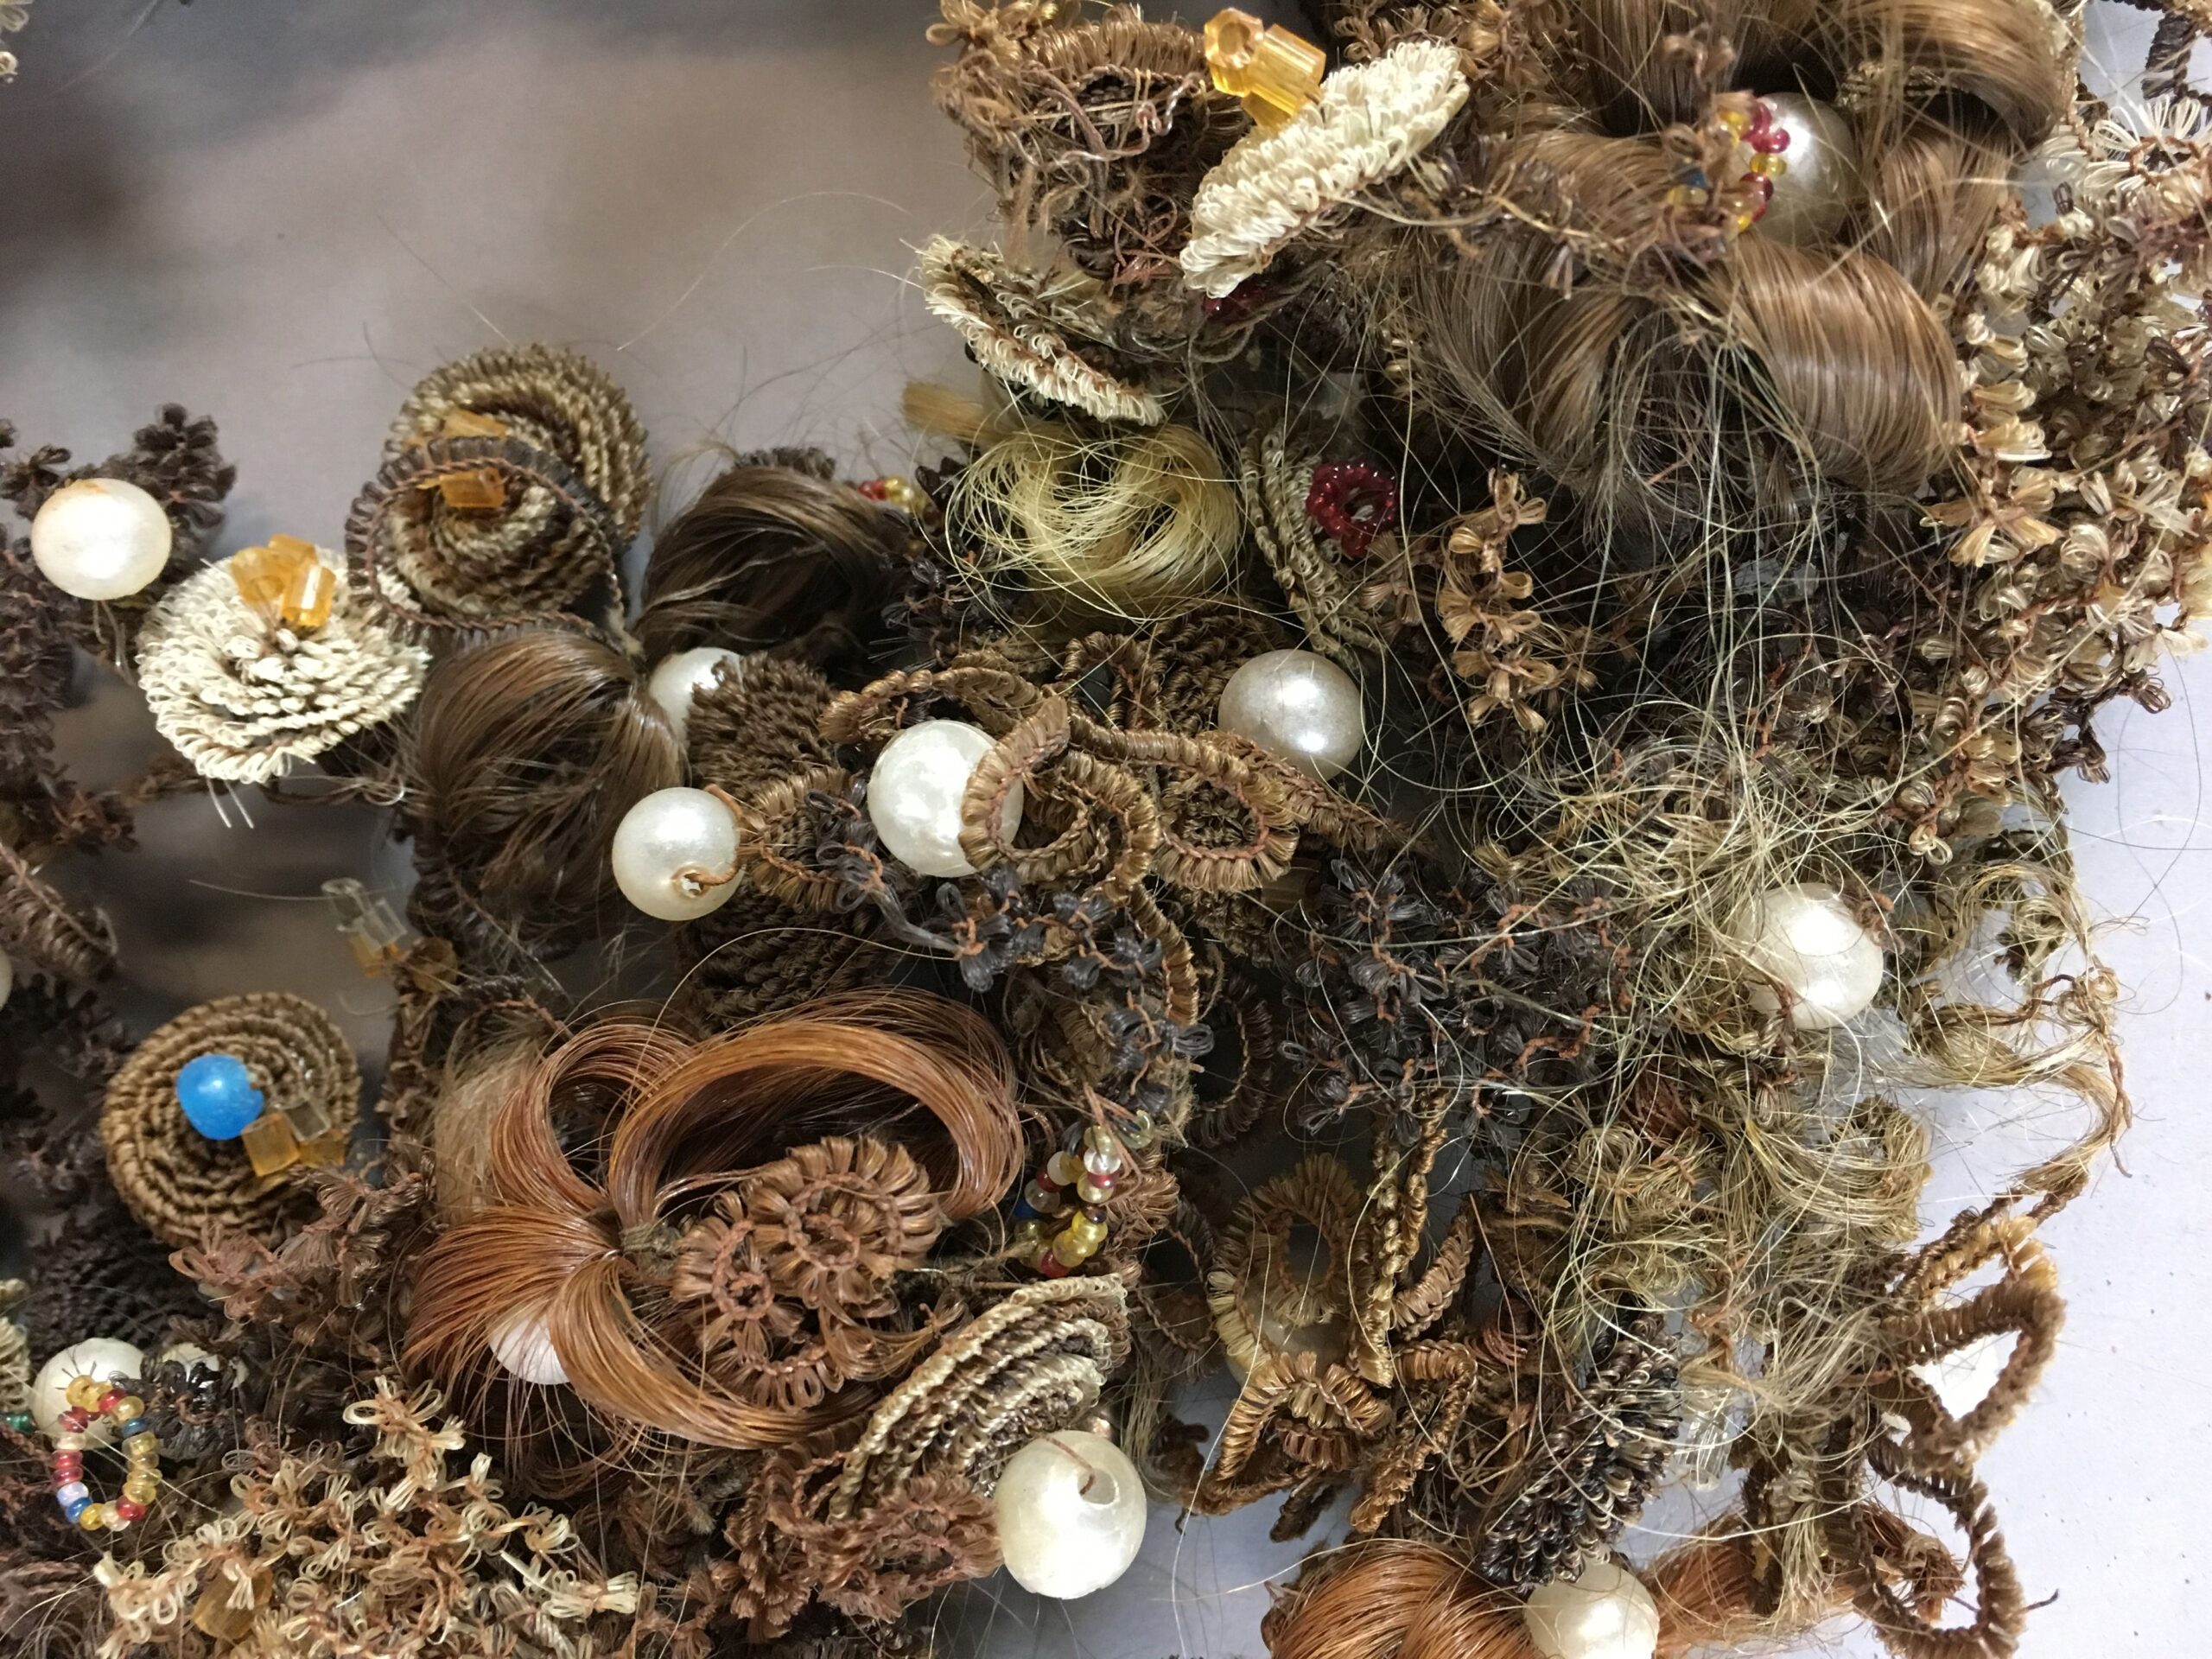 Close up on a portion of a highly decorative wreath woven of varying shades of brown and blonde human hair, with occasional accent beads.